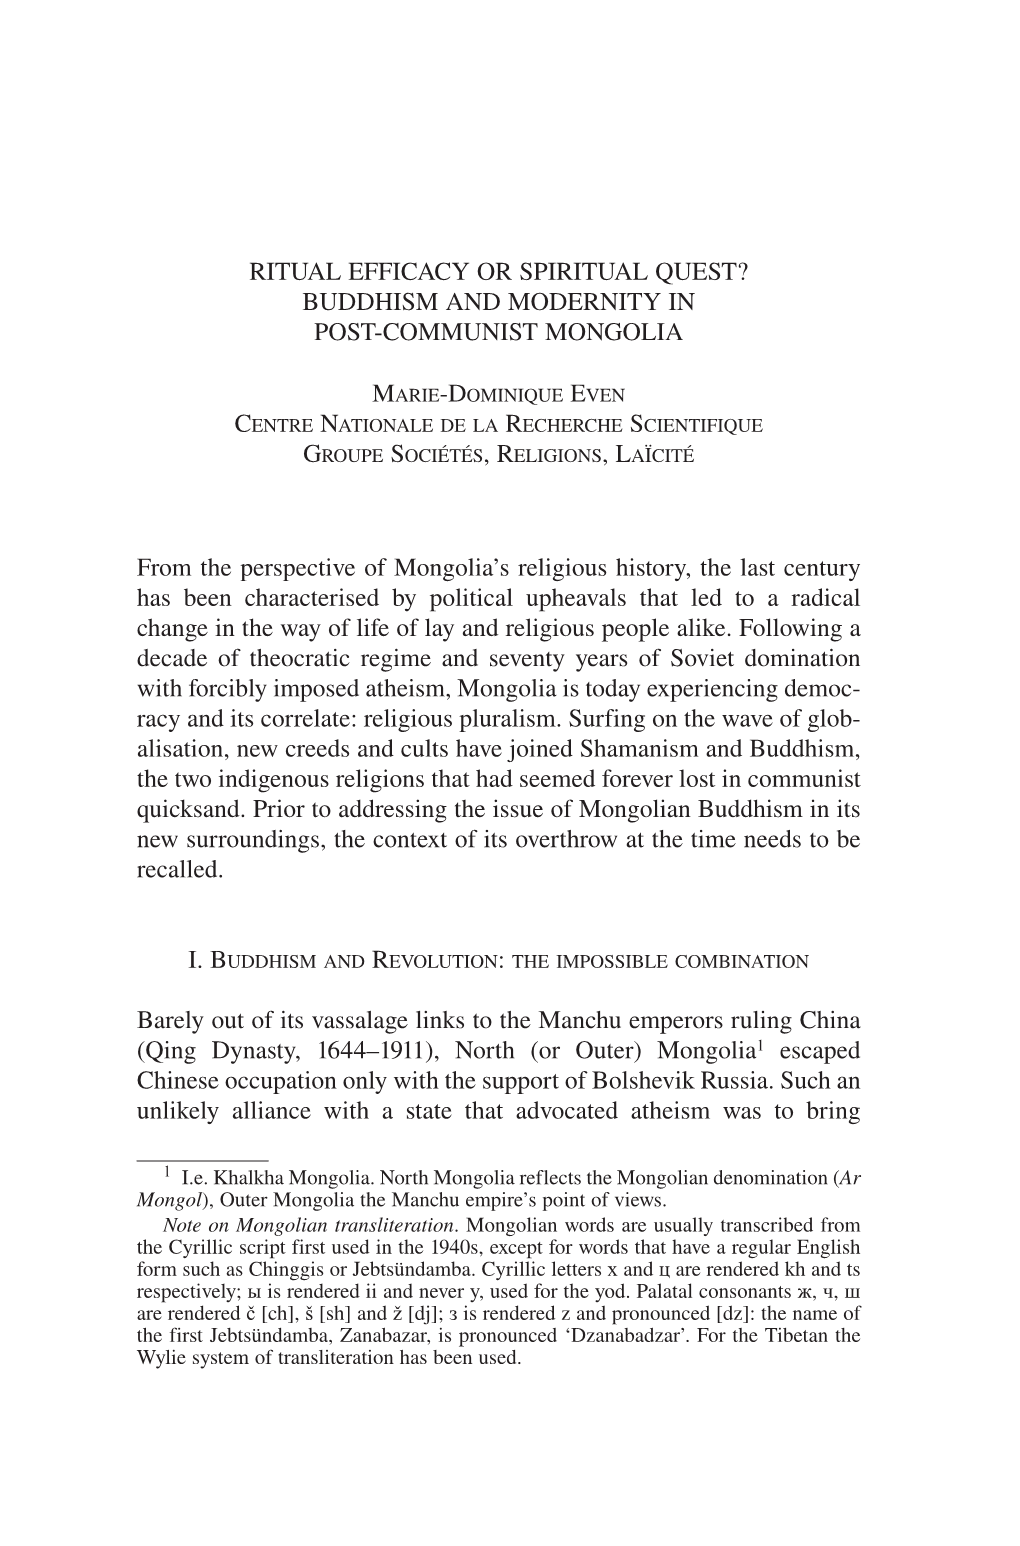 Ritual Efficacy Or Spiritual Quest? Buddhism and Modernity in Post-Communist Mongolia